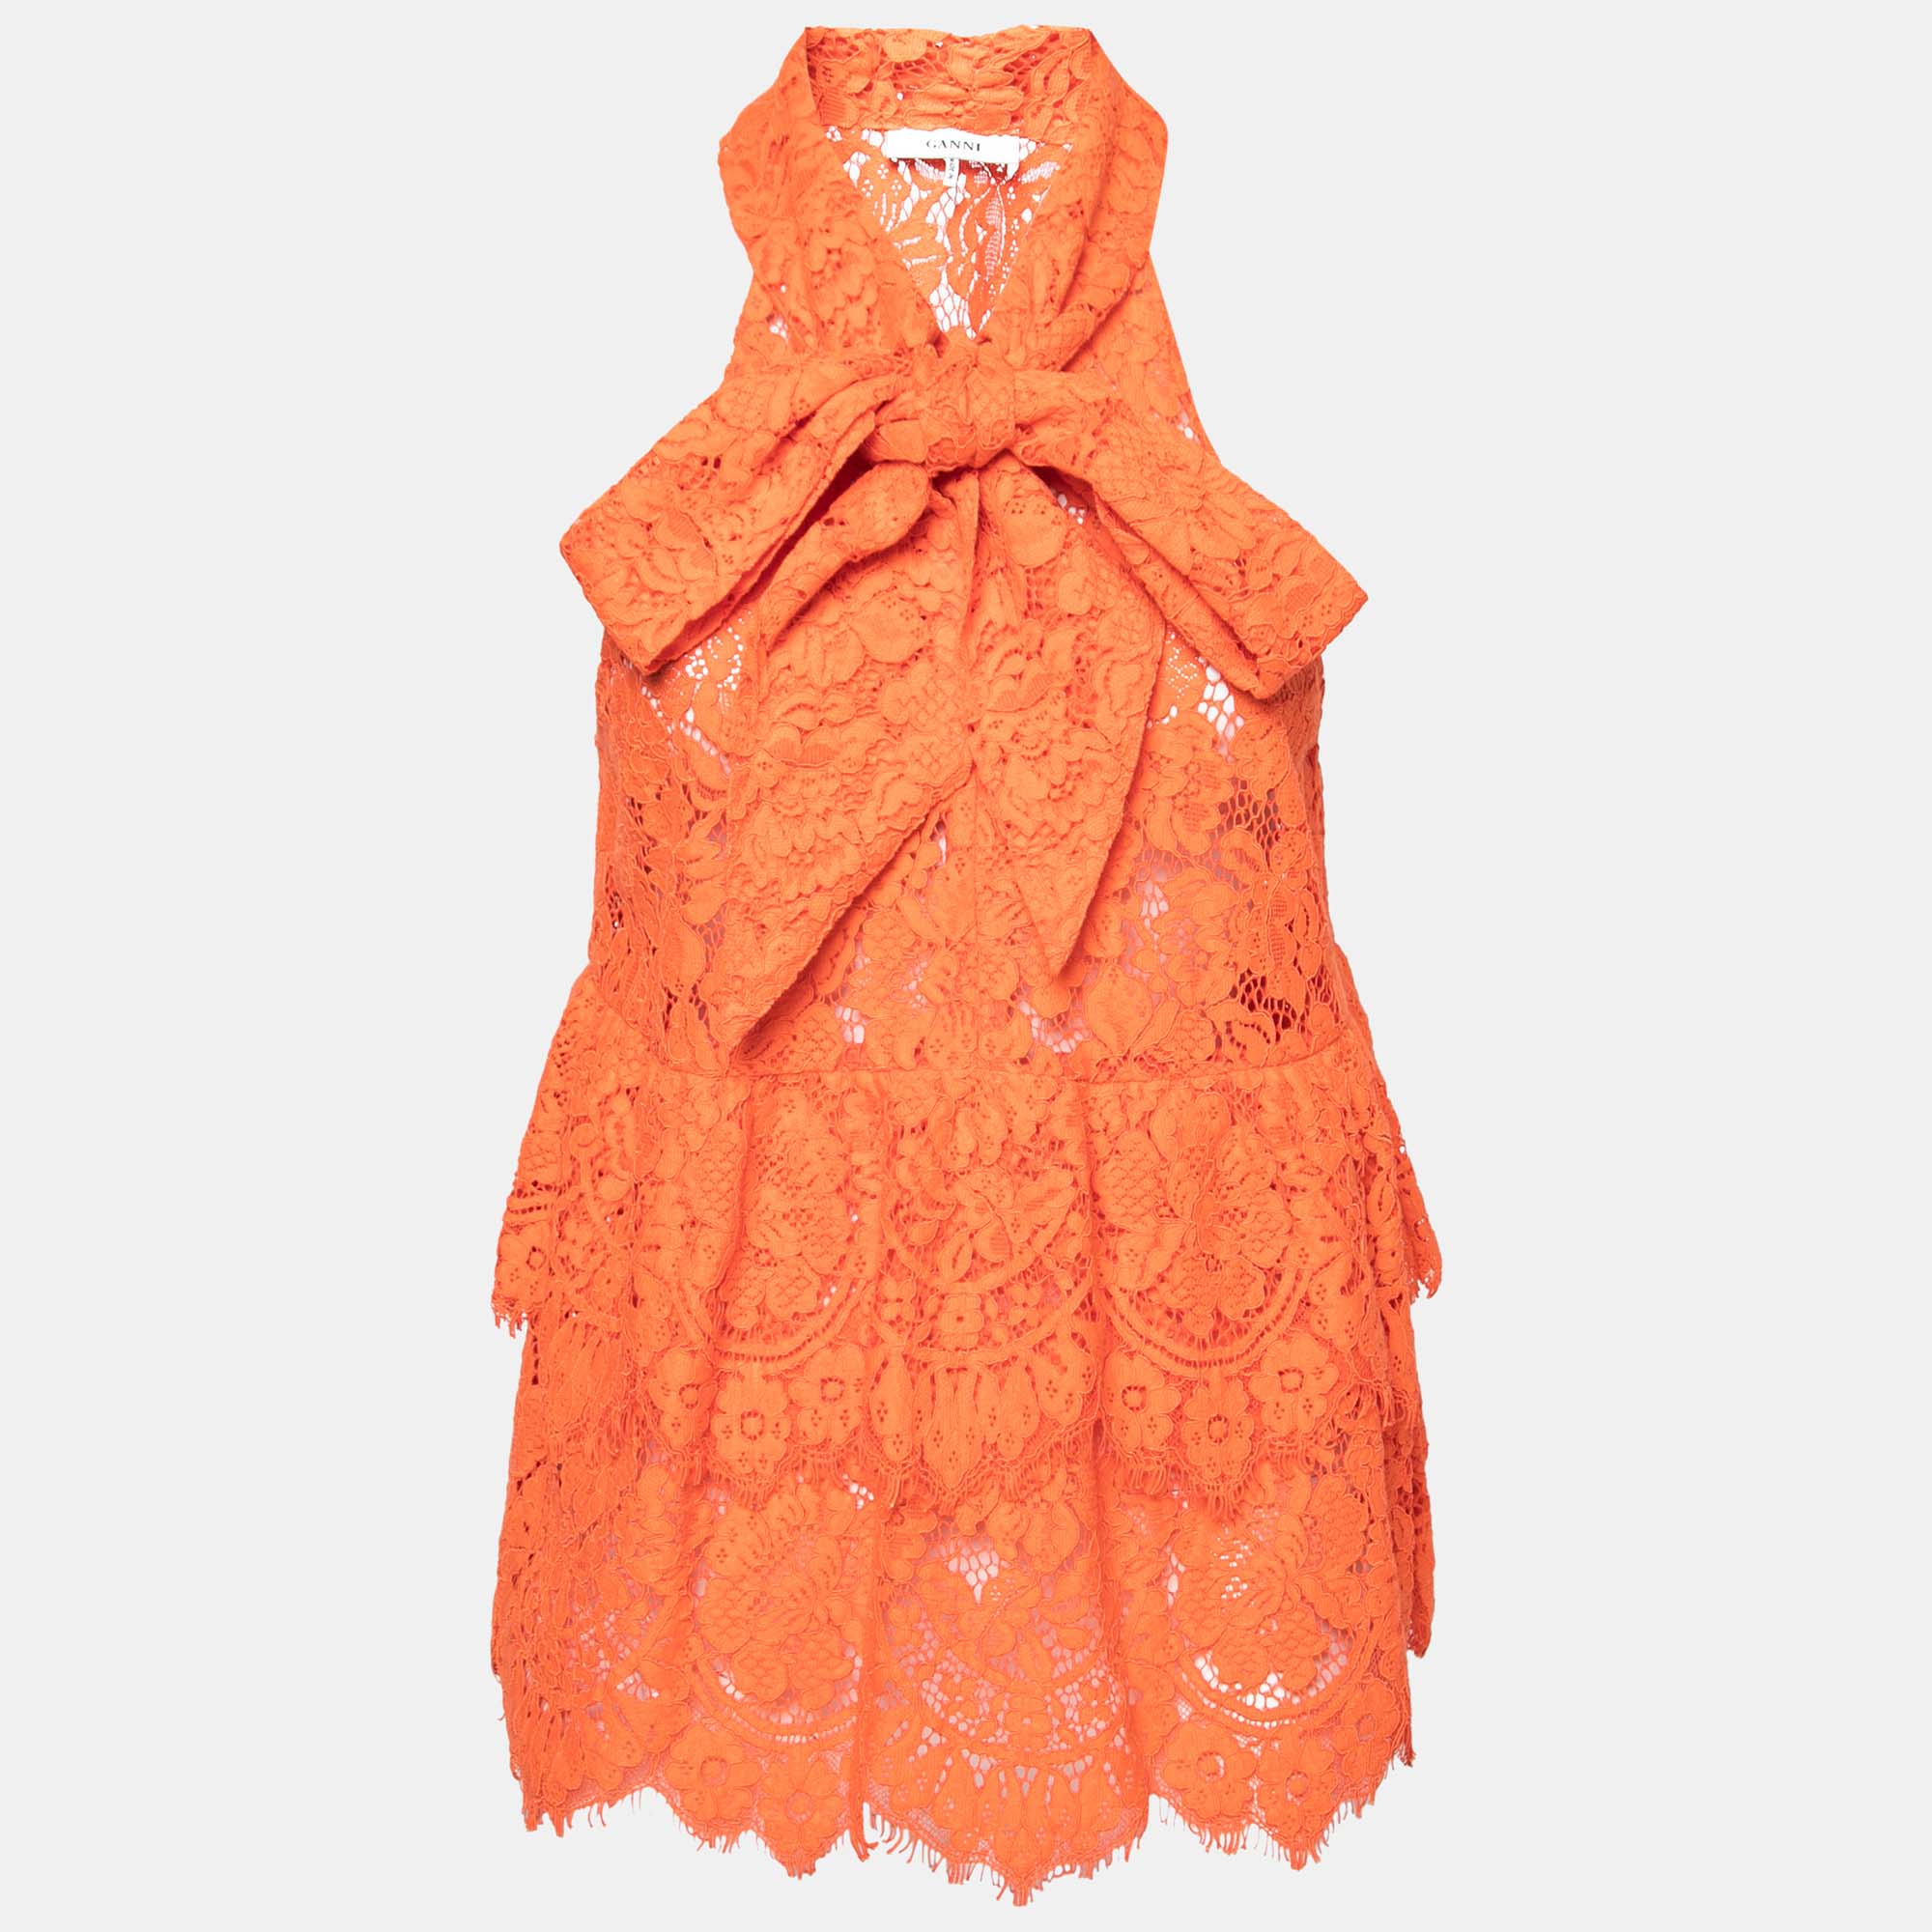 Beautiful floral lace envelopes this Ganni top to grant a chic feminine touch to your outfit. Featuring a lovely orange hue tiered formations and a sleeveless style this top is finished with lacy edgings and a cute necktie. Style it with contrasting accessories and tall heels to make an impressionable statement.